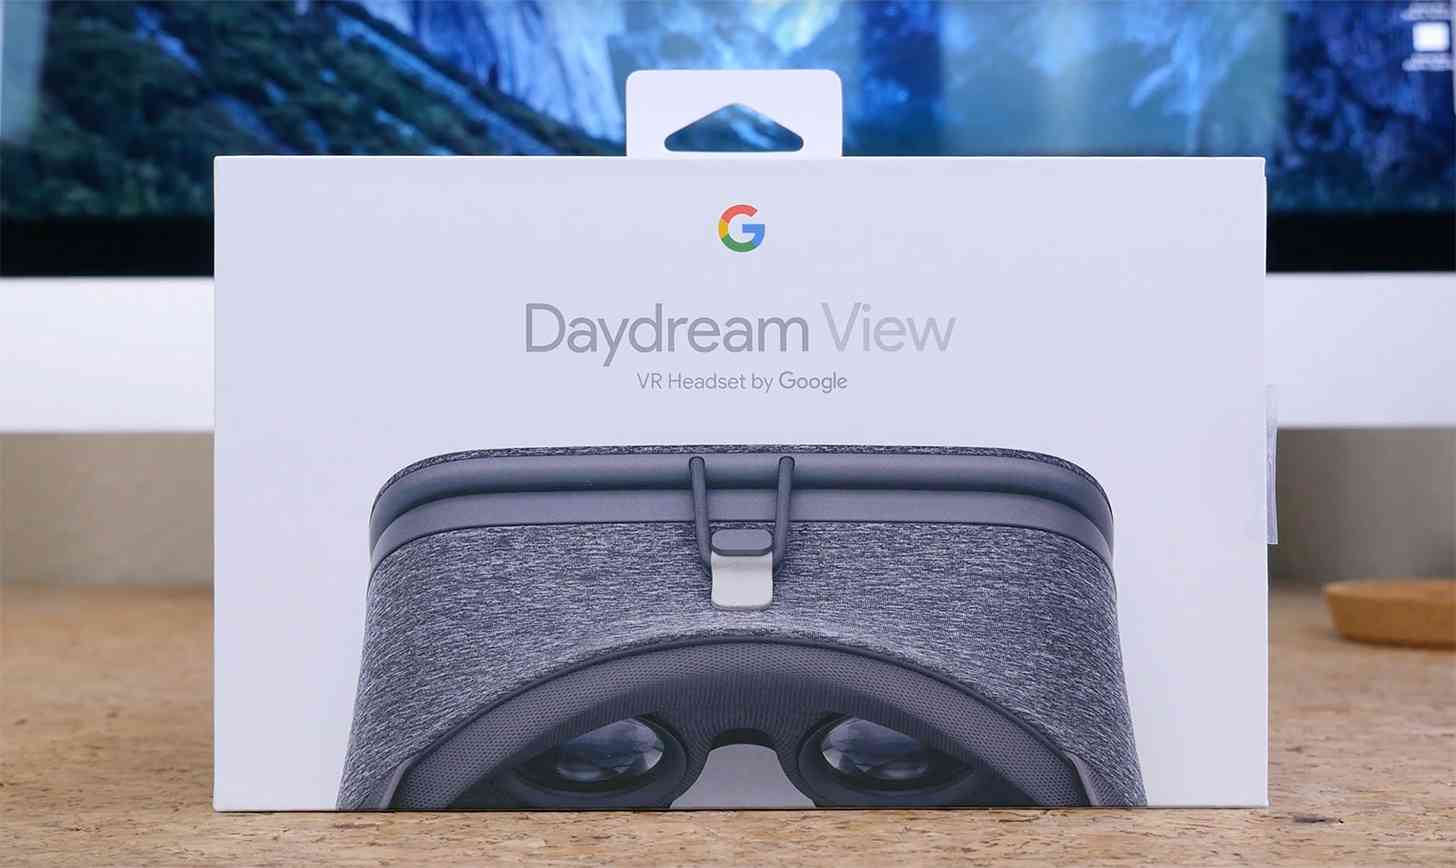 Google Daydream View VR headset hands-on video